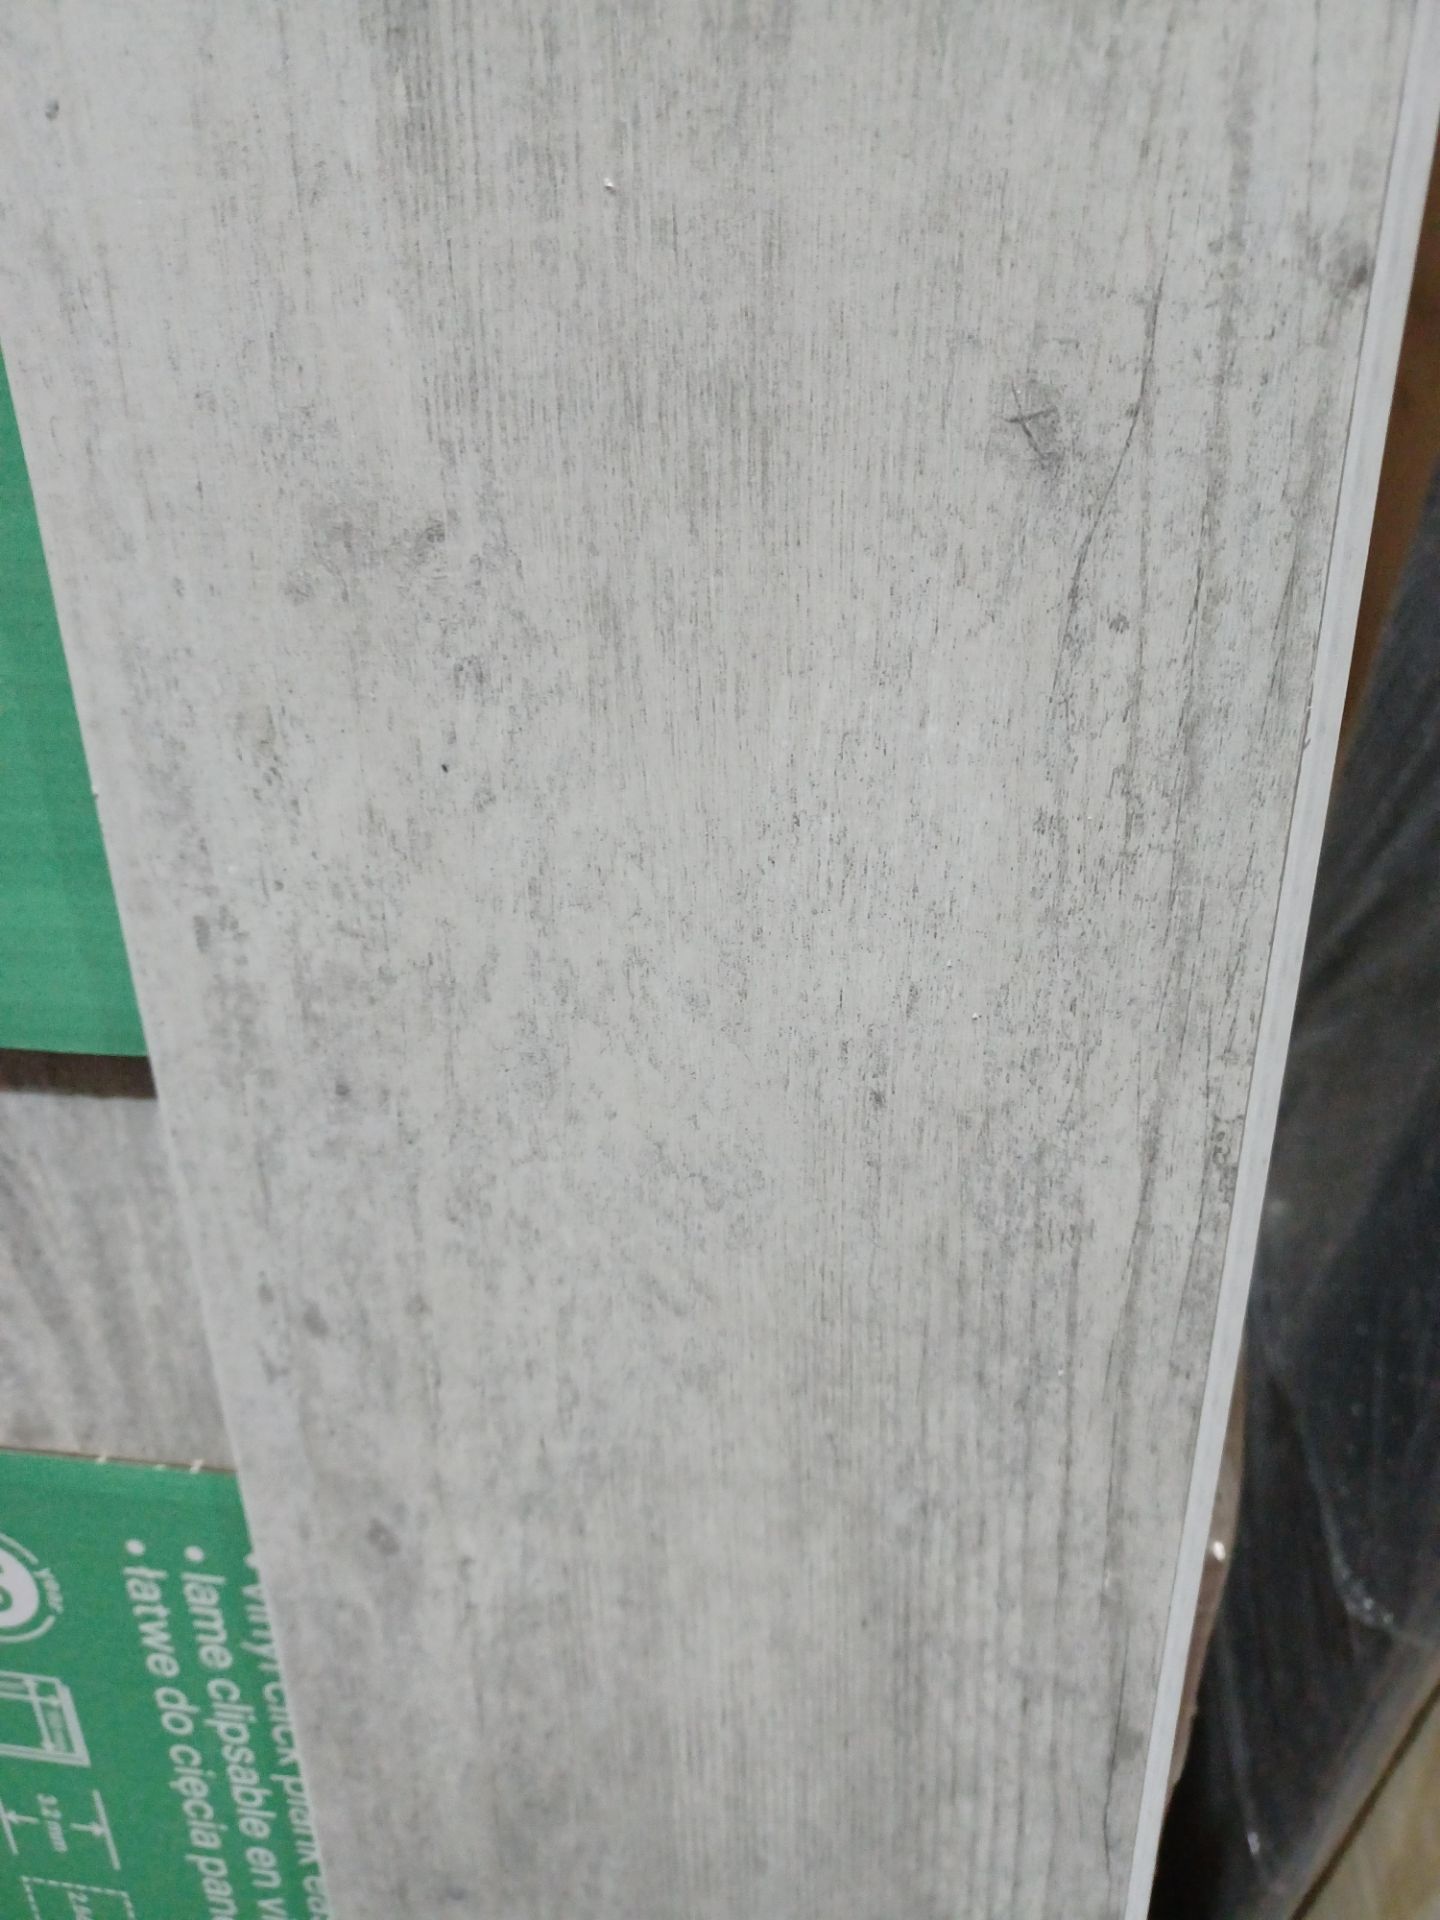 PALLET TO CONTAIN 52 x PACKS OF BACHETA LUXURY VINYL CLICK PLANK FLOORING. RRP £58 PER PACK. - Image 2 of 2